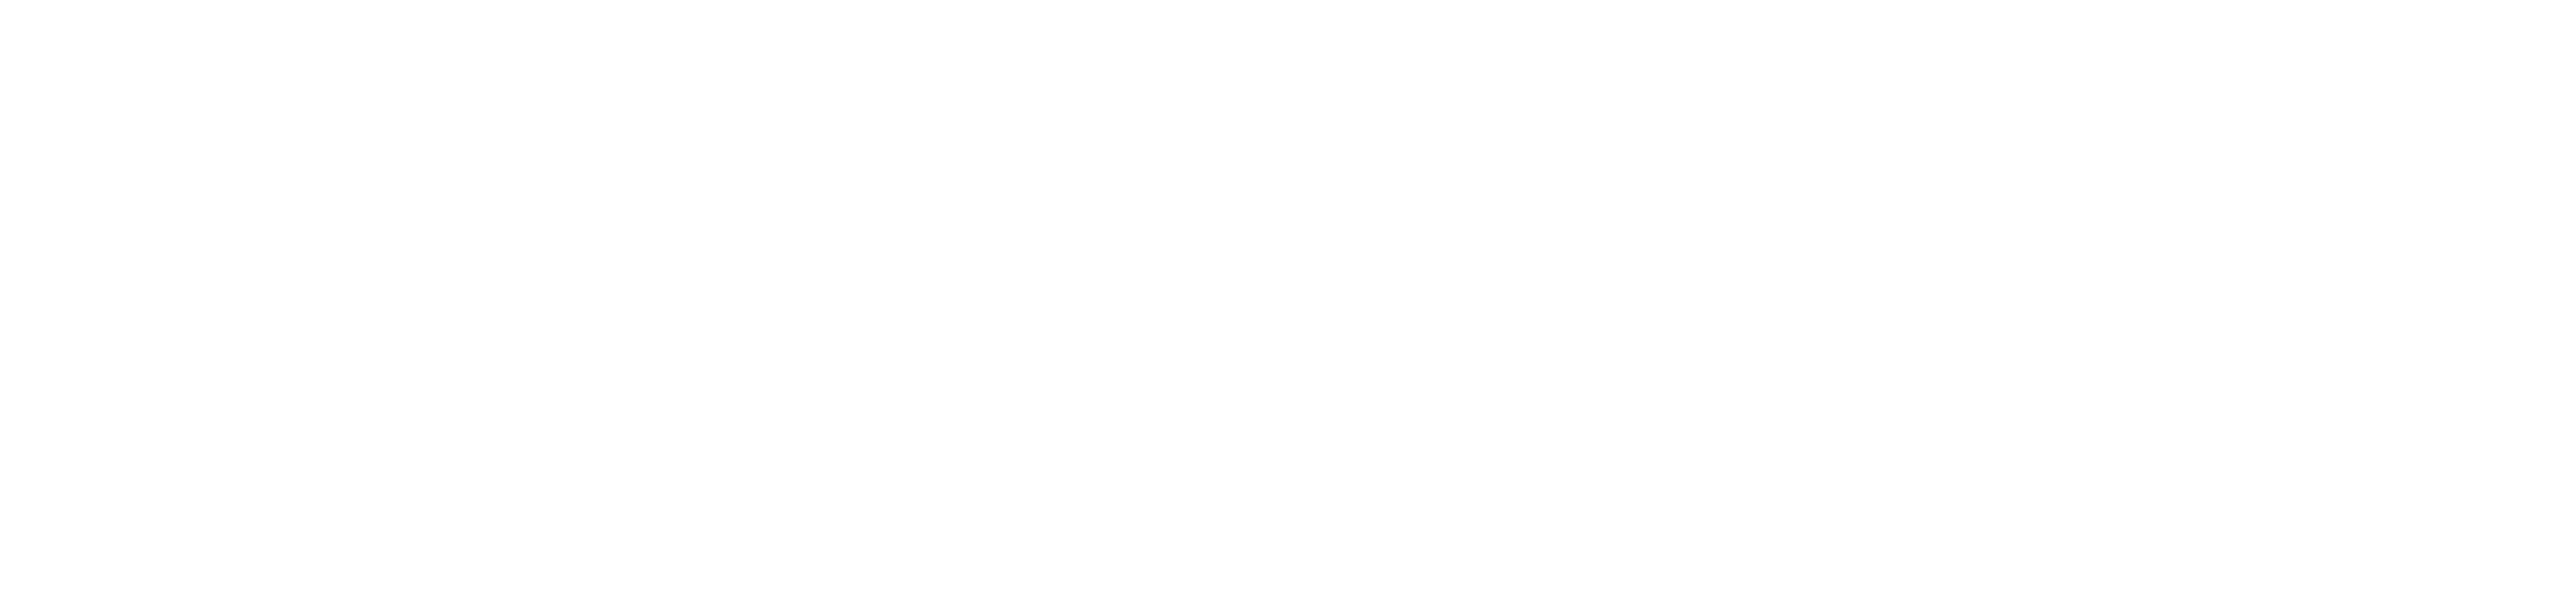 Webmaster.or.id - Indonesia Webmaster Community